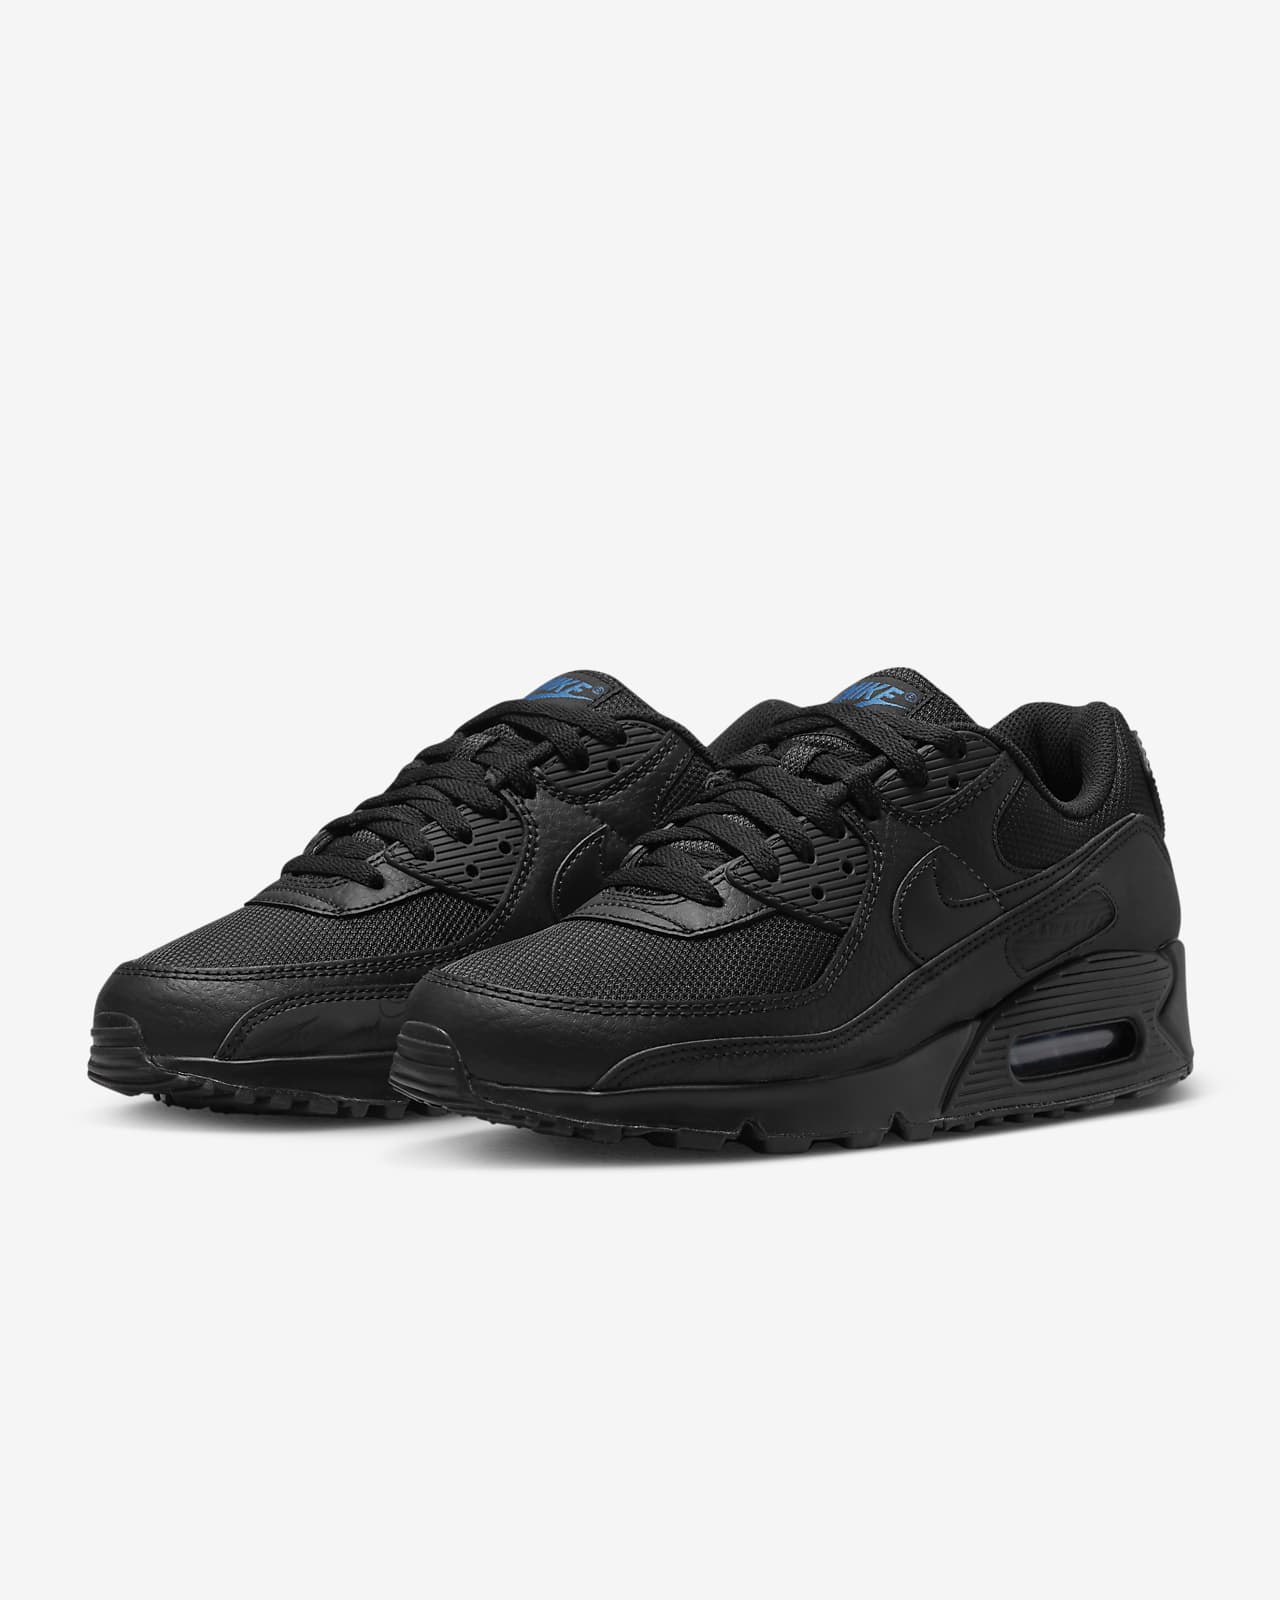 size 14 nike air max 90 shoes